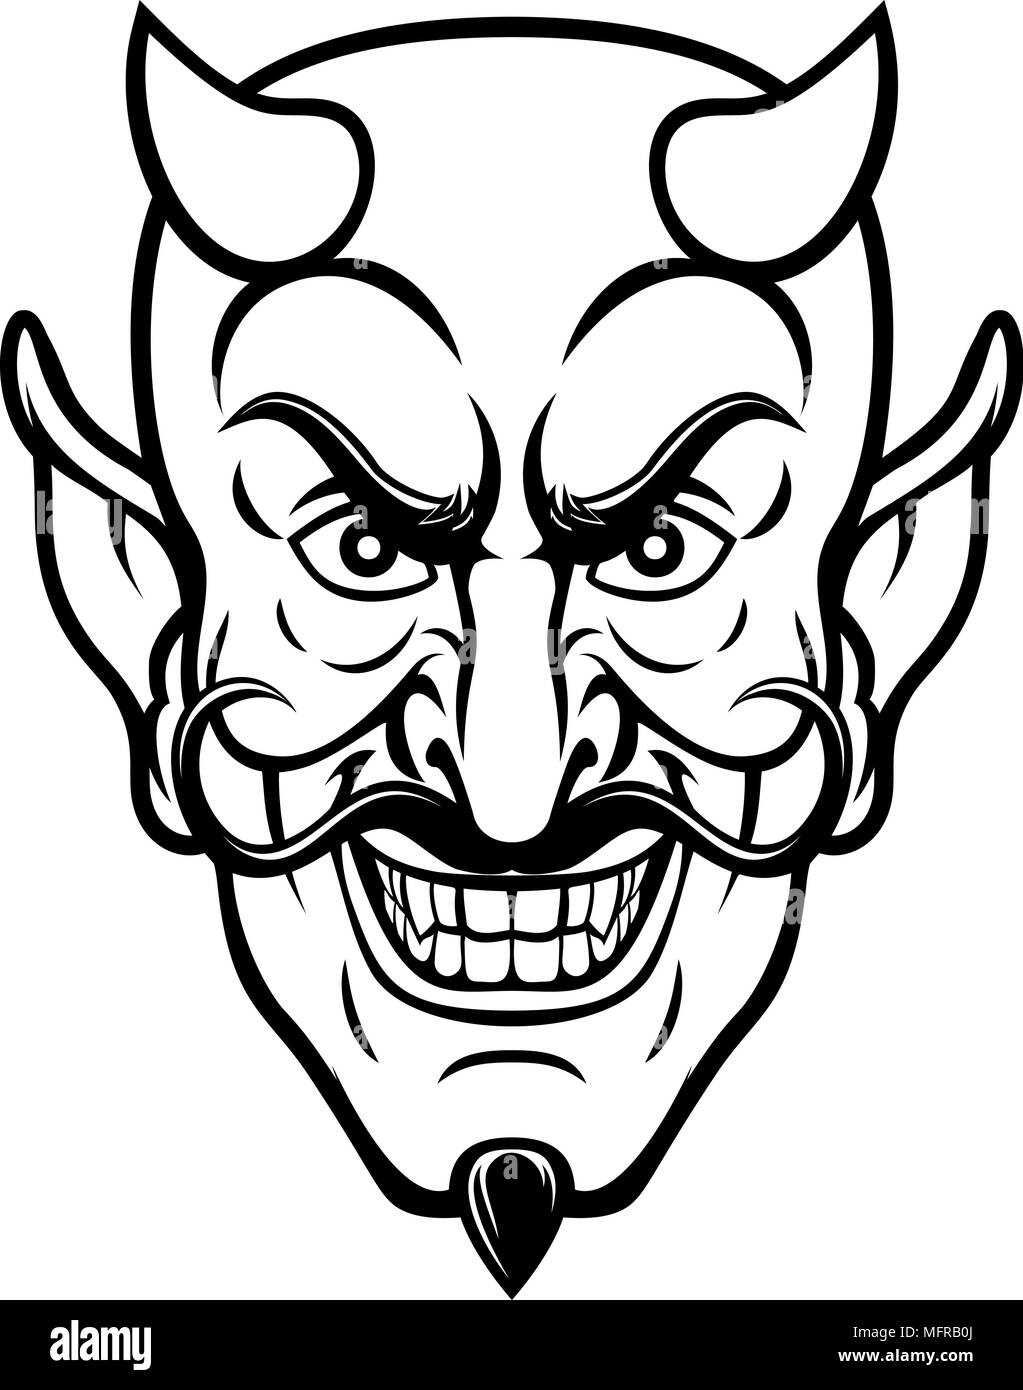 Person devil Black and White Stock Photos & Images - Alamy